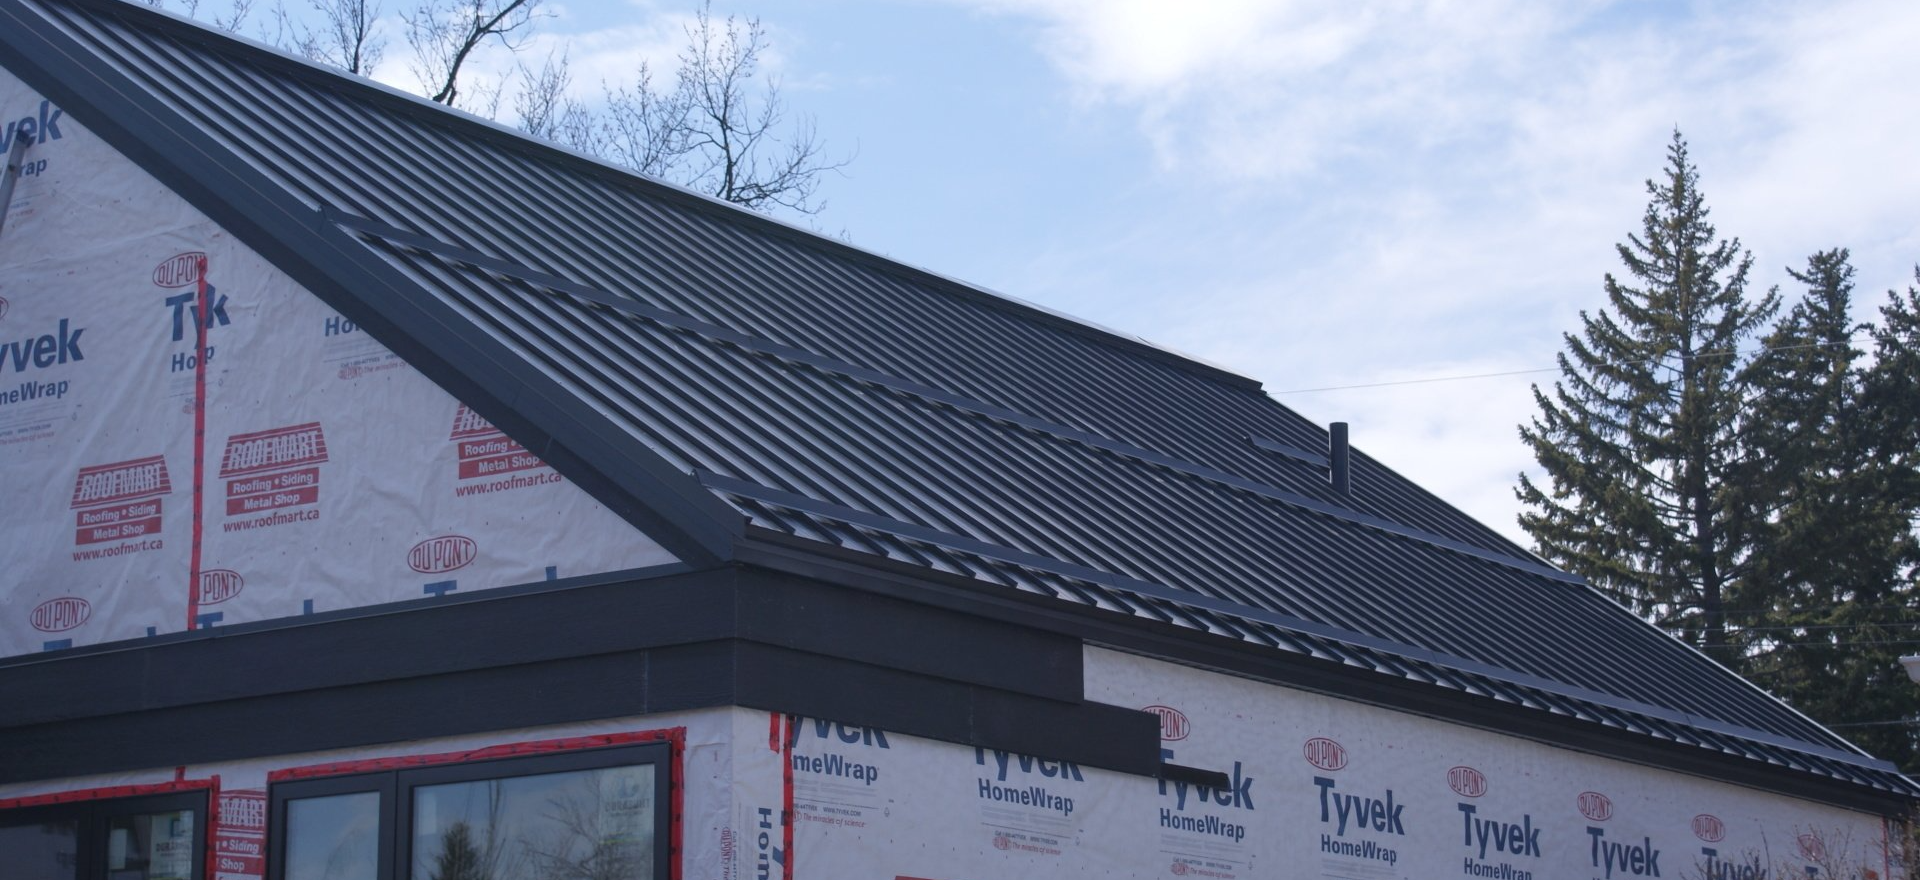 Preventing and Solving Common Issues with Corrugated Metal Roofing